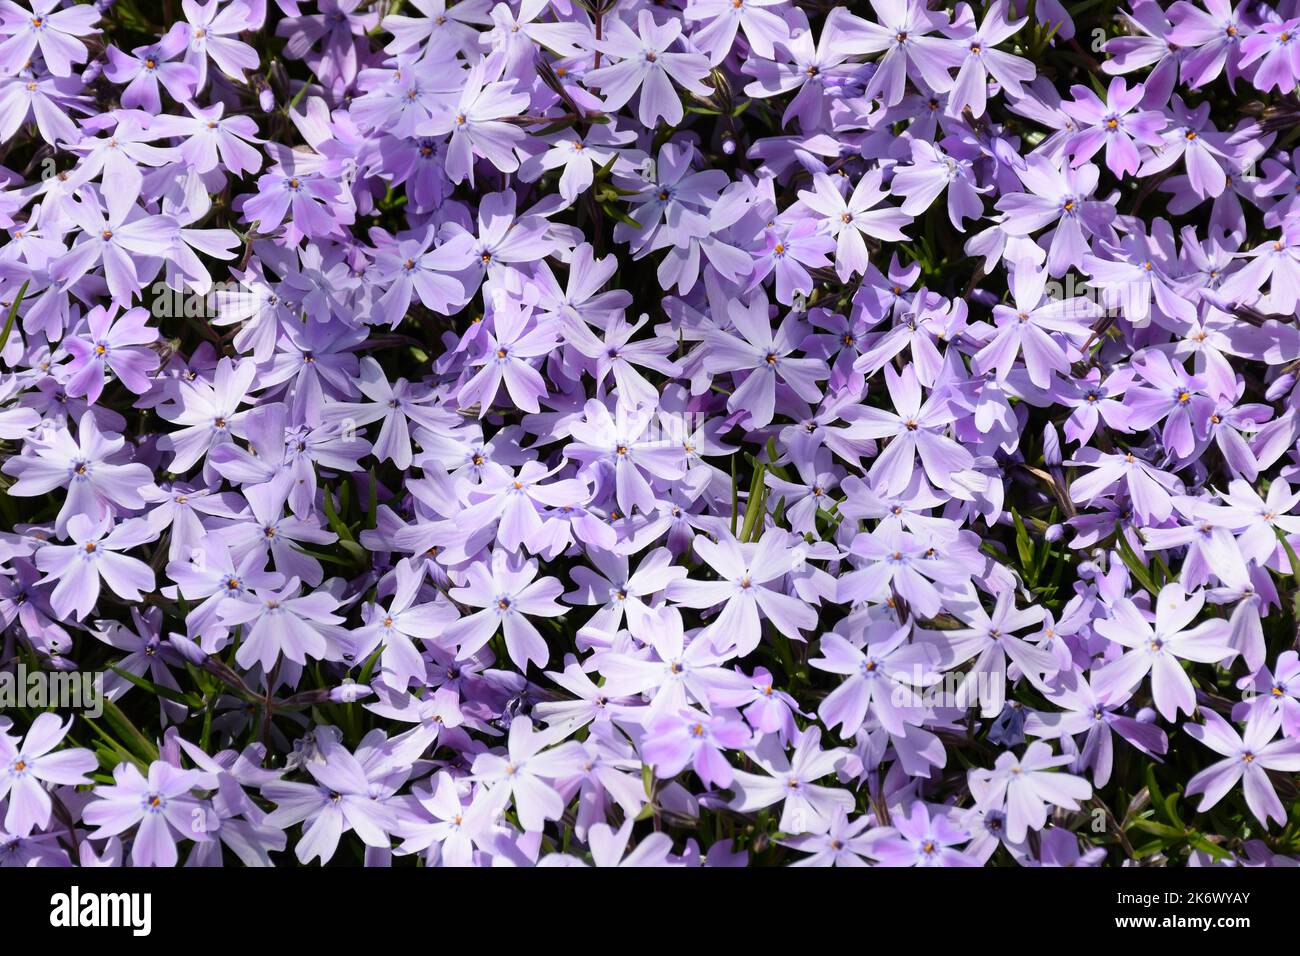 Lots of phlox flowers in soft purple all over the frame. Leaves are visible between them. Stock Photo